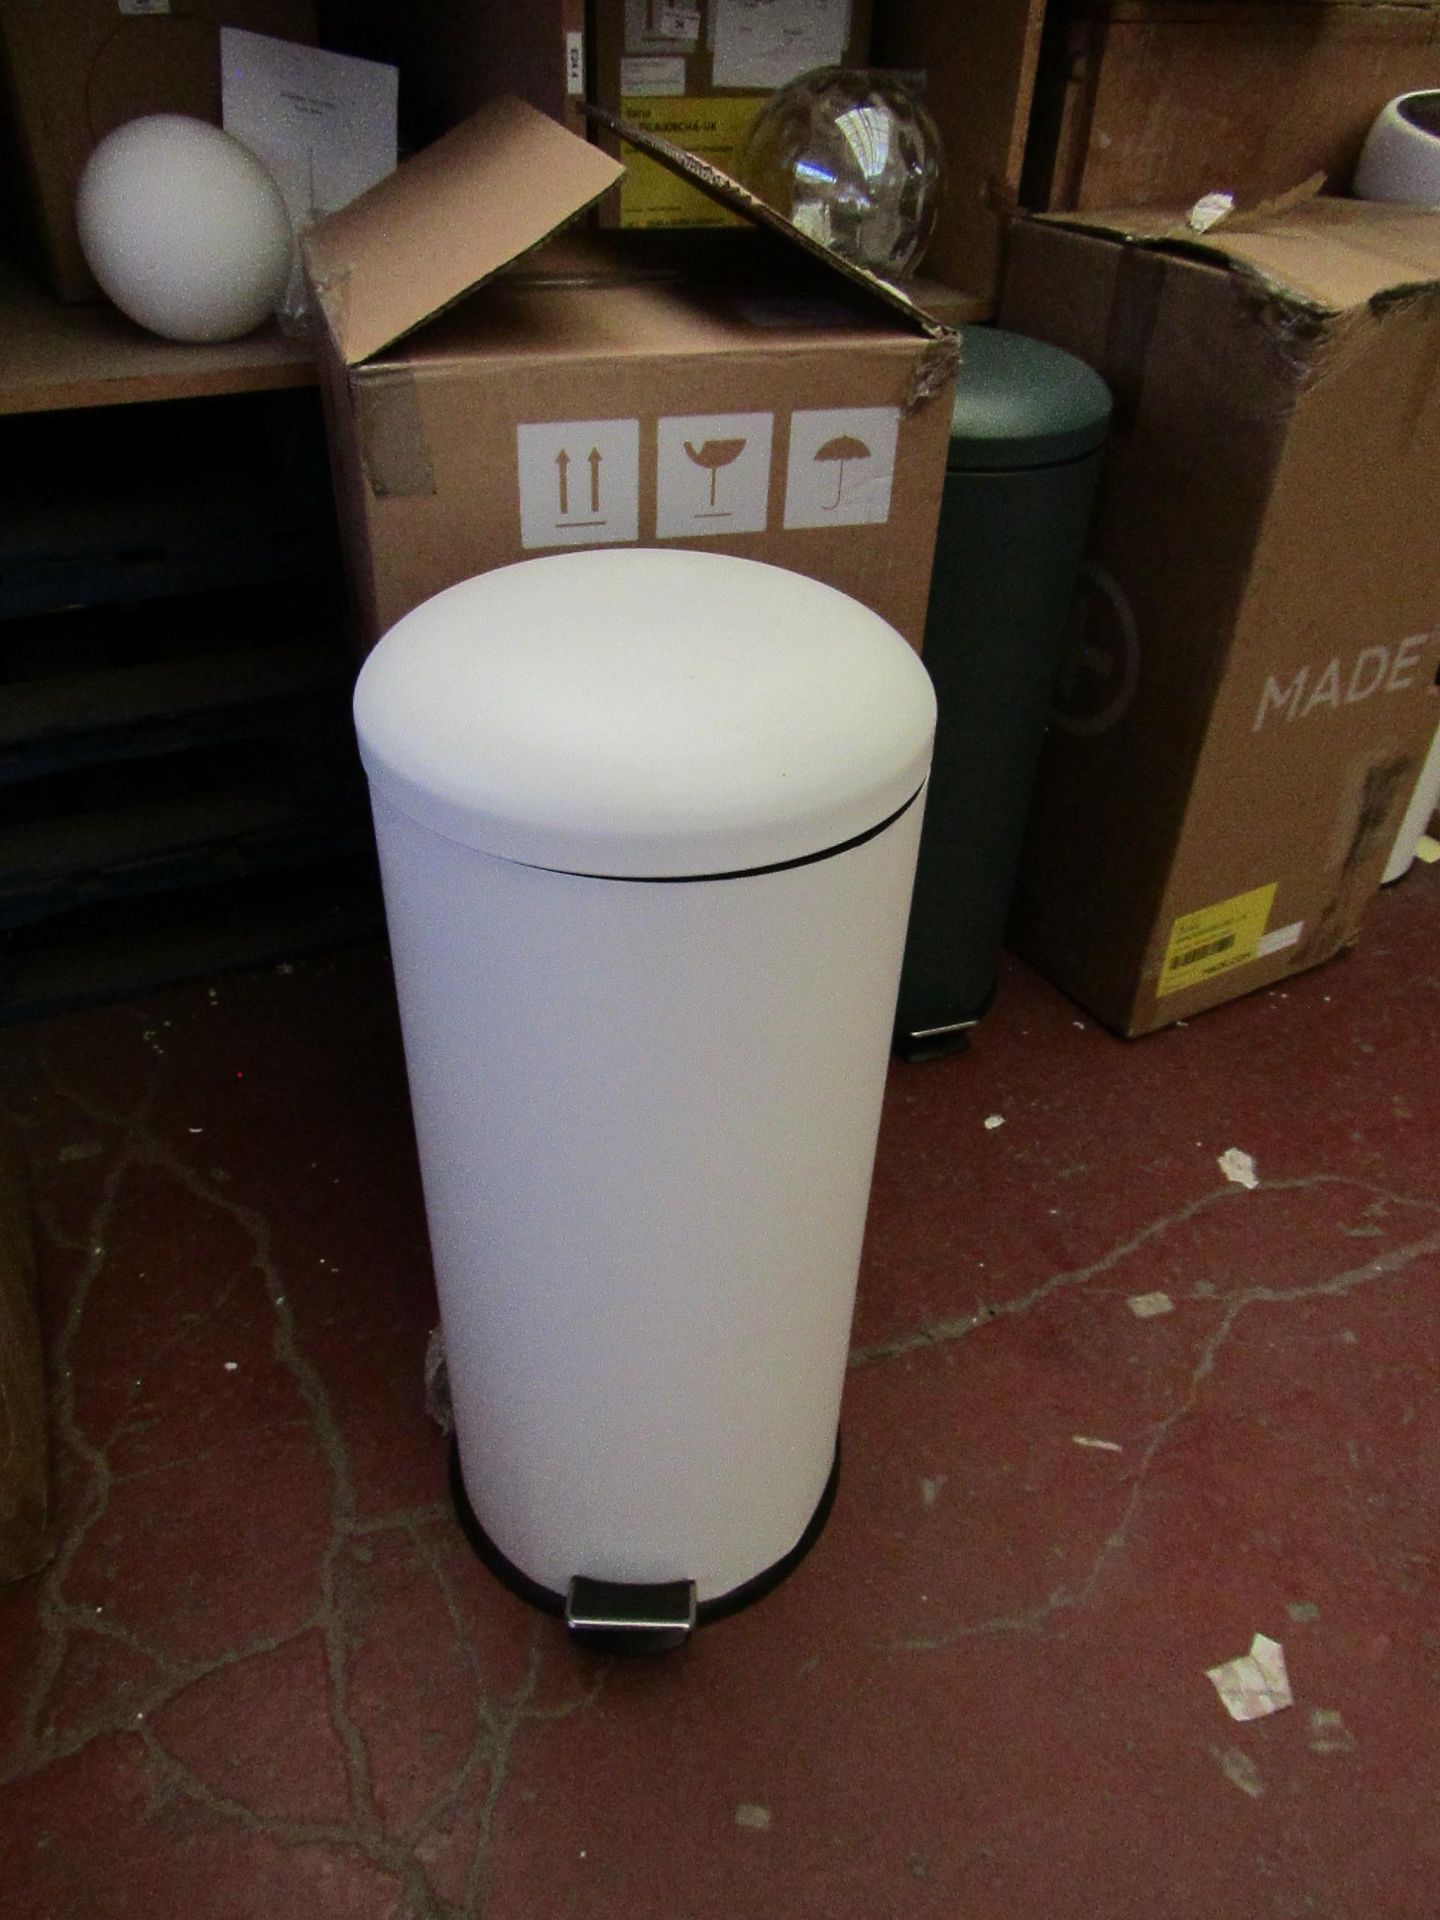 | 1X | MADE.COM ESSENTAILS JOSS 30L DOMED BIN IN WHITE | HAS A FEW MINOR MARKS | BOXED | RRP £39 |